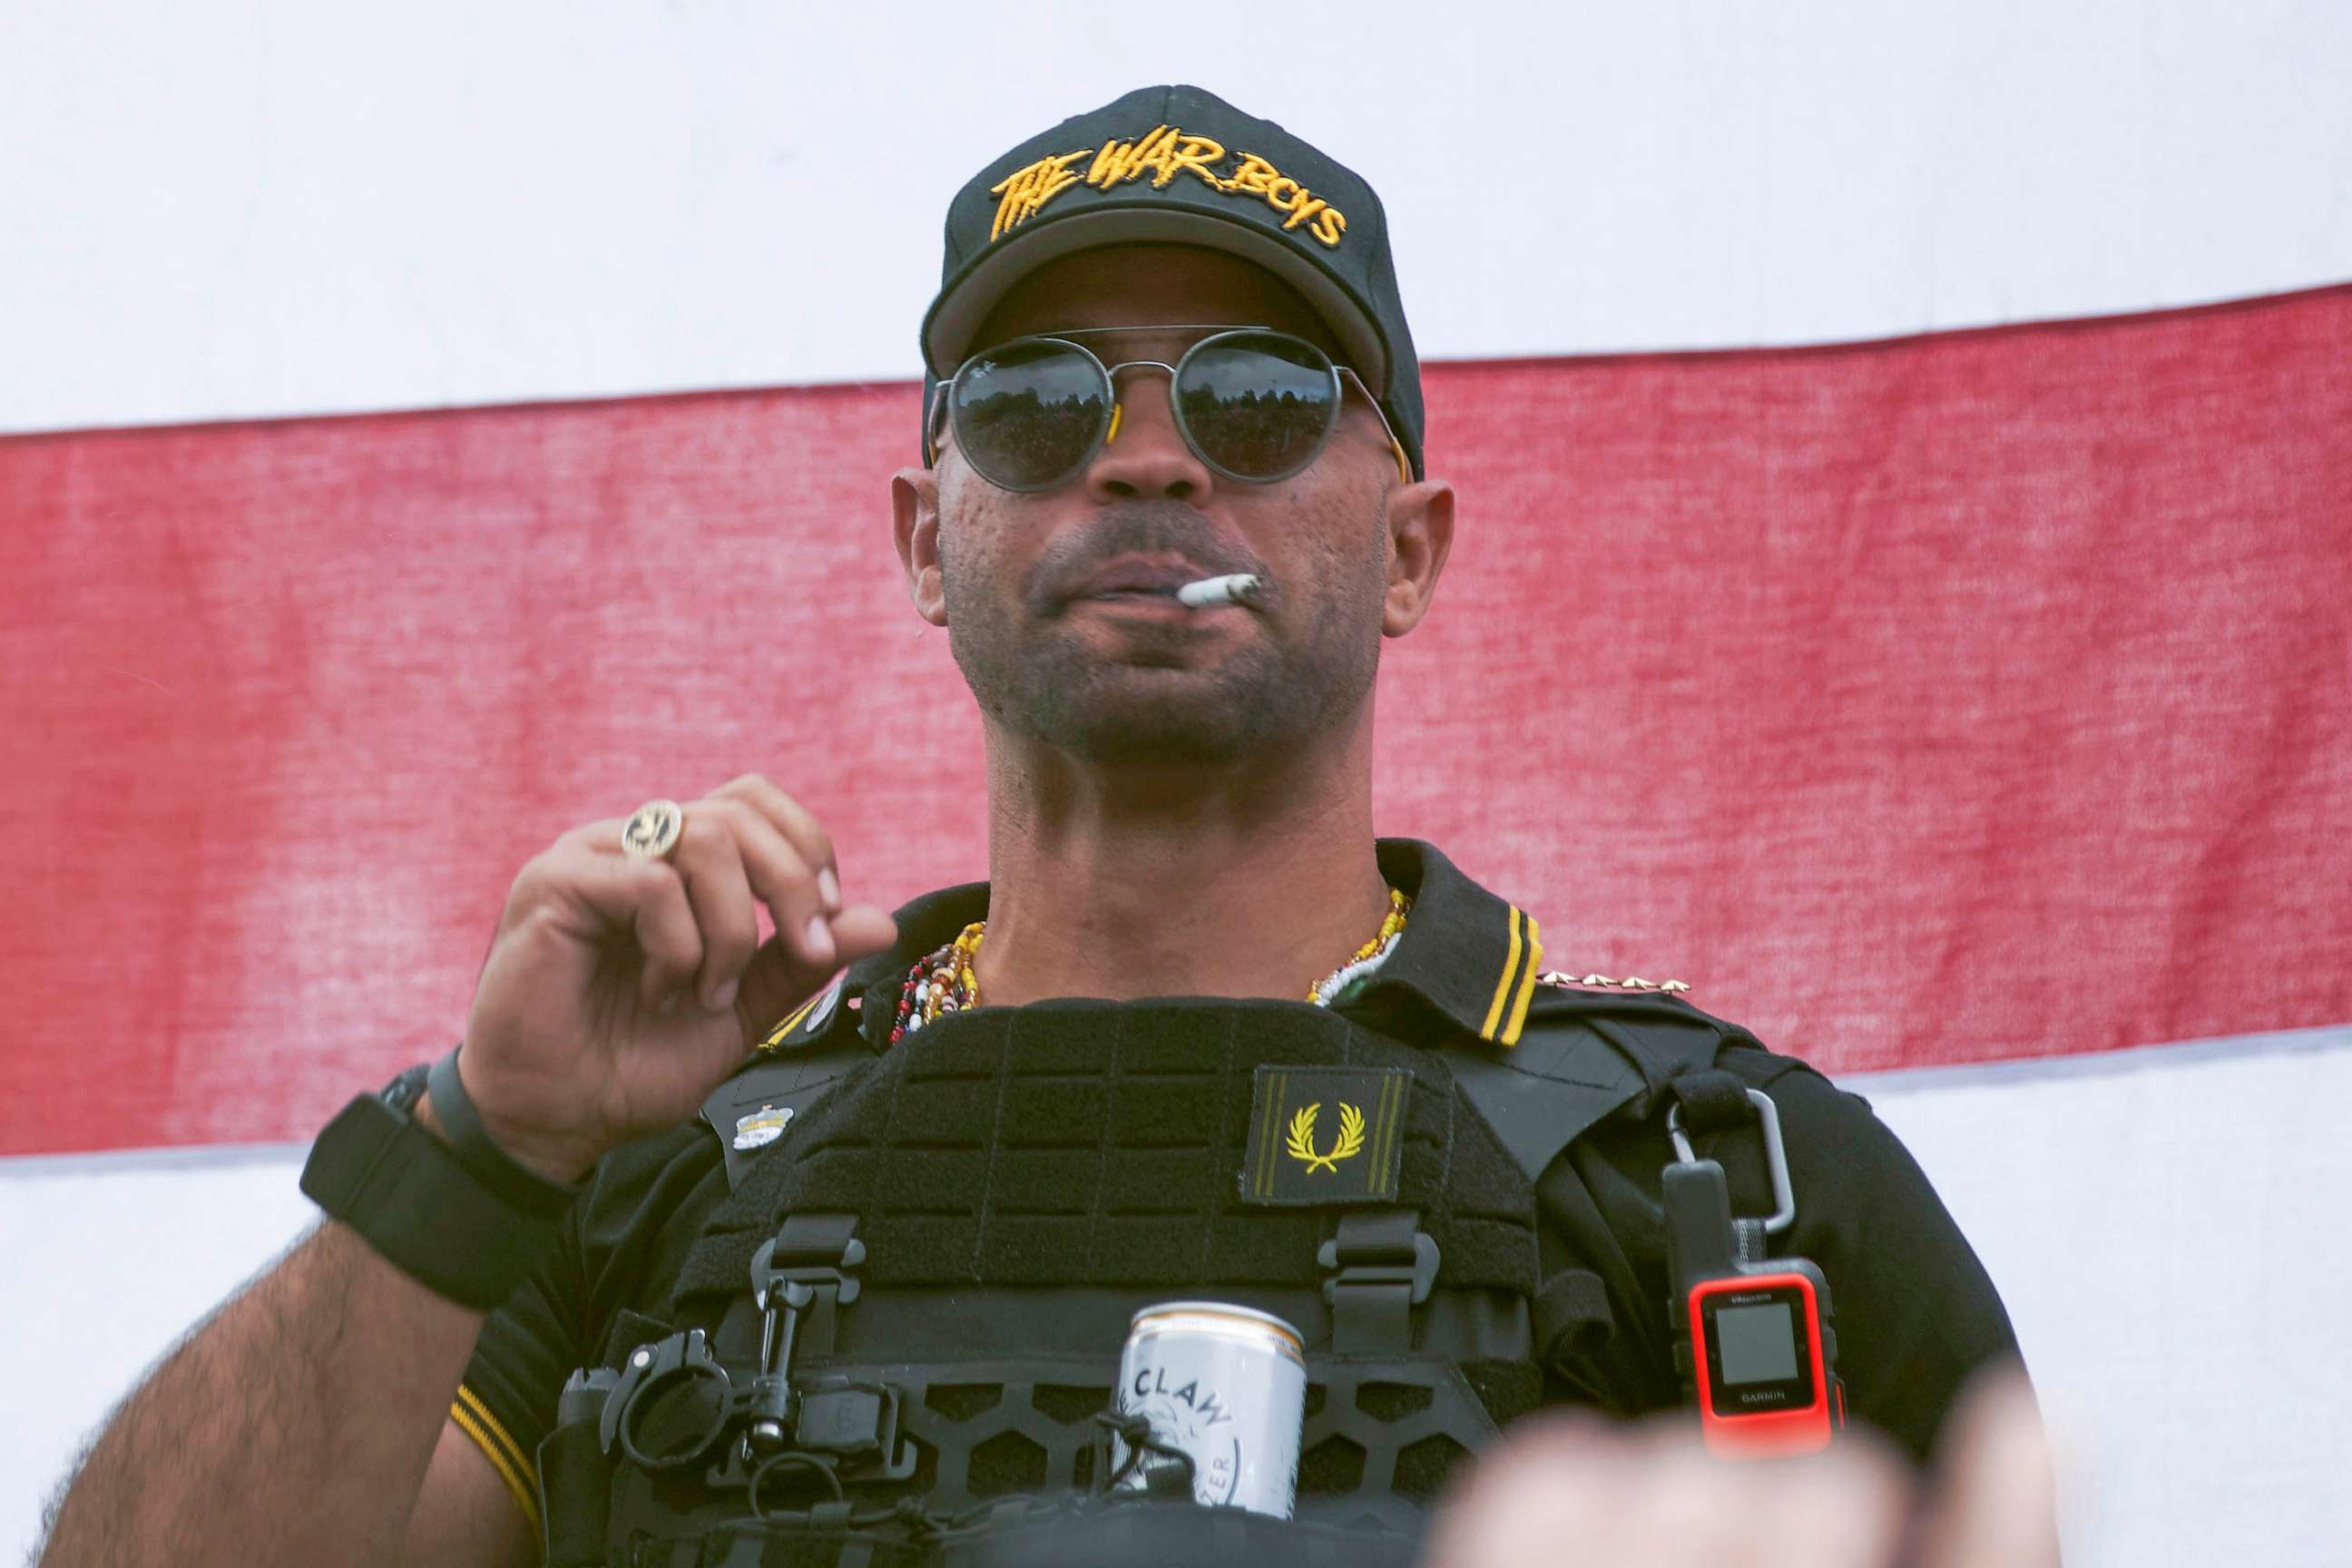 PHOTO: FILE - Proud Boys leader Henry "Enrique" Tarrio wears a hat that says The War Boys during a rally in Portland, Ore., Sept. 26, 2020.